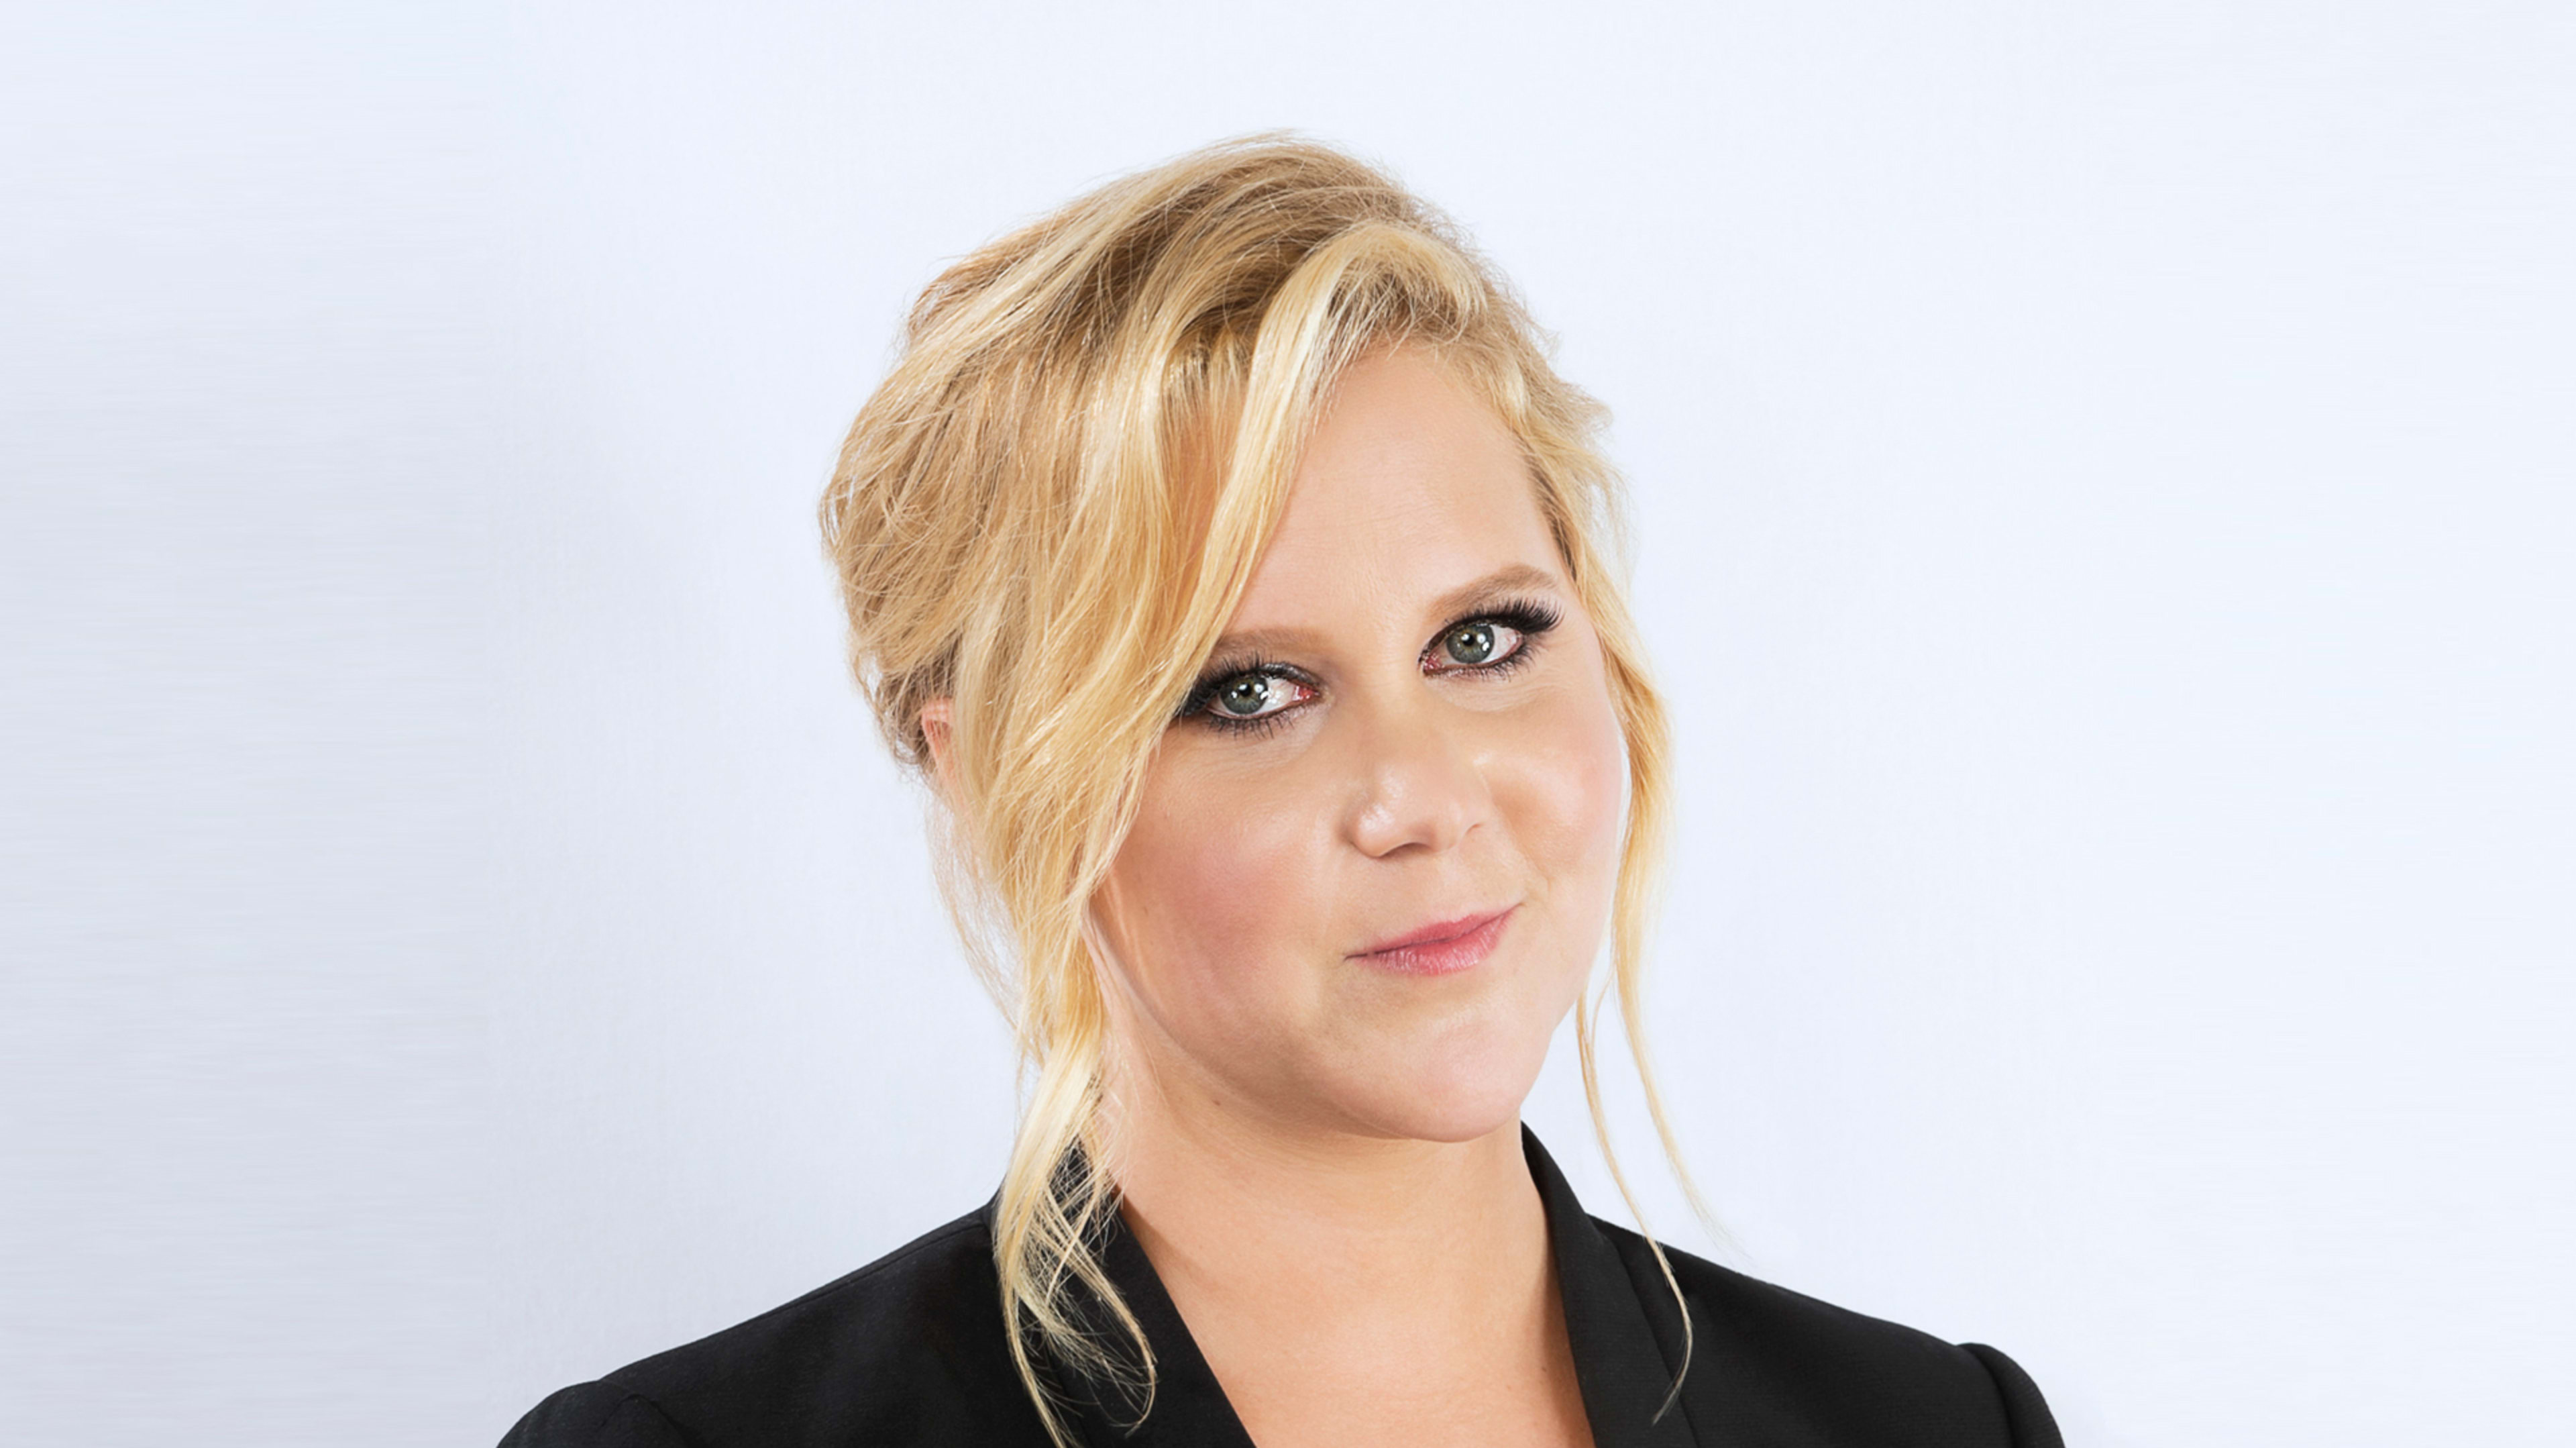 Amy Schumer On Aziz Ansari: “It’s Good For Everybody To Learn That Behavior’s Not Acceptable.”